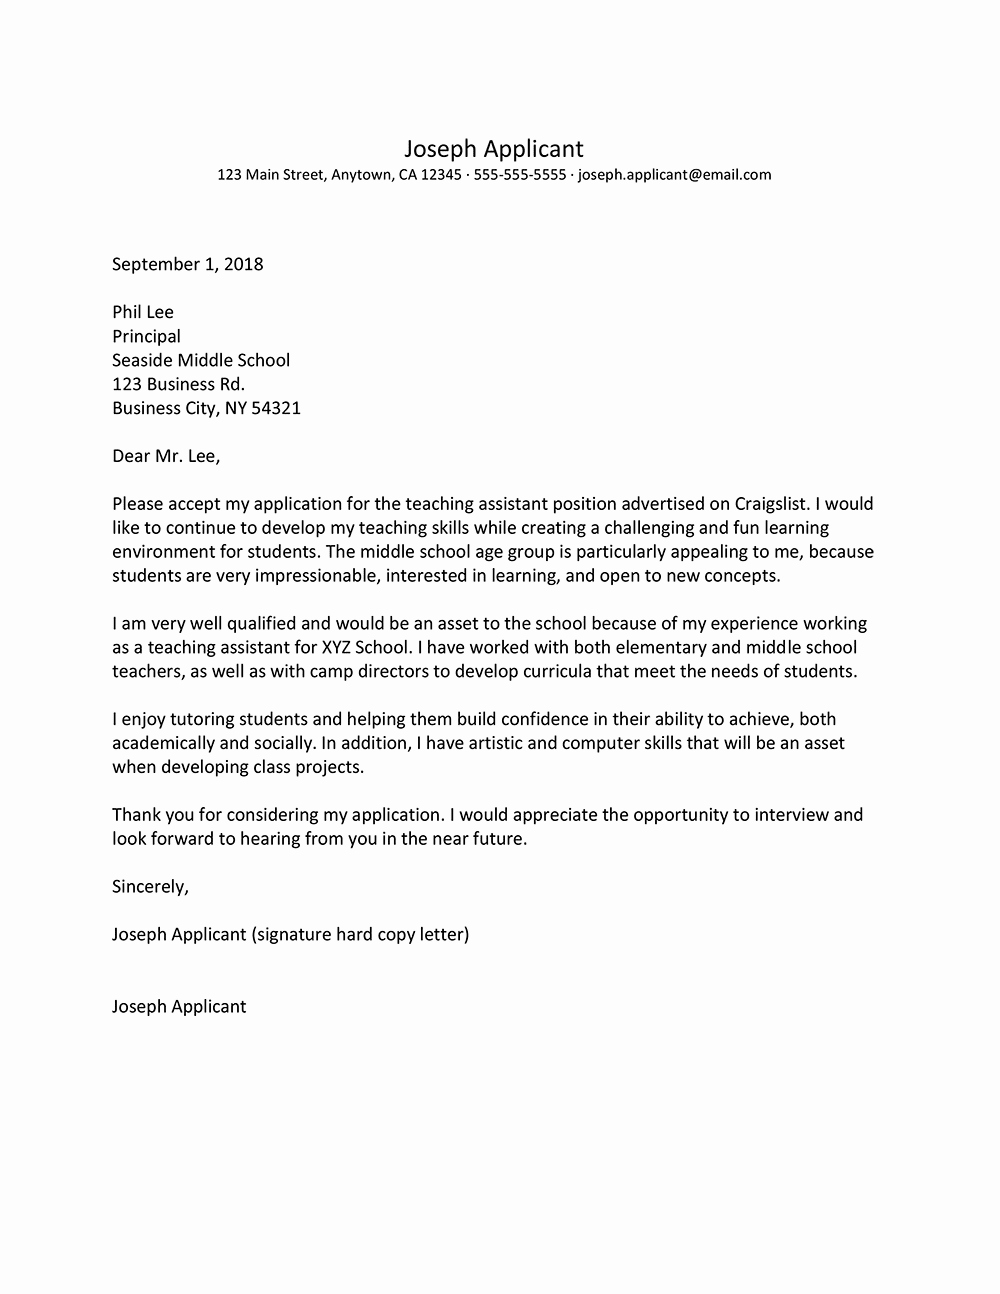 Teaching assistant Cover Letter Samples with Cover Letter